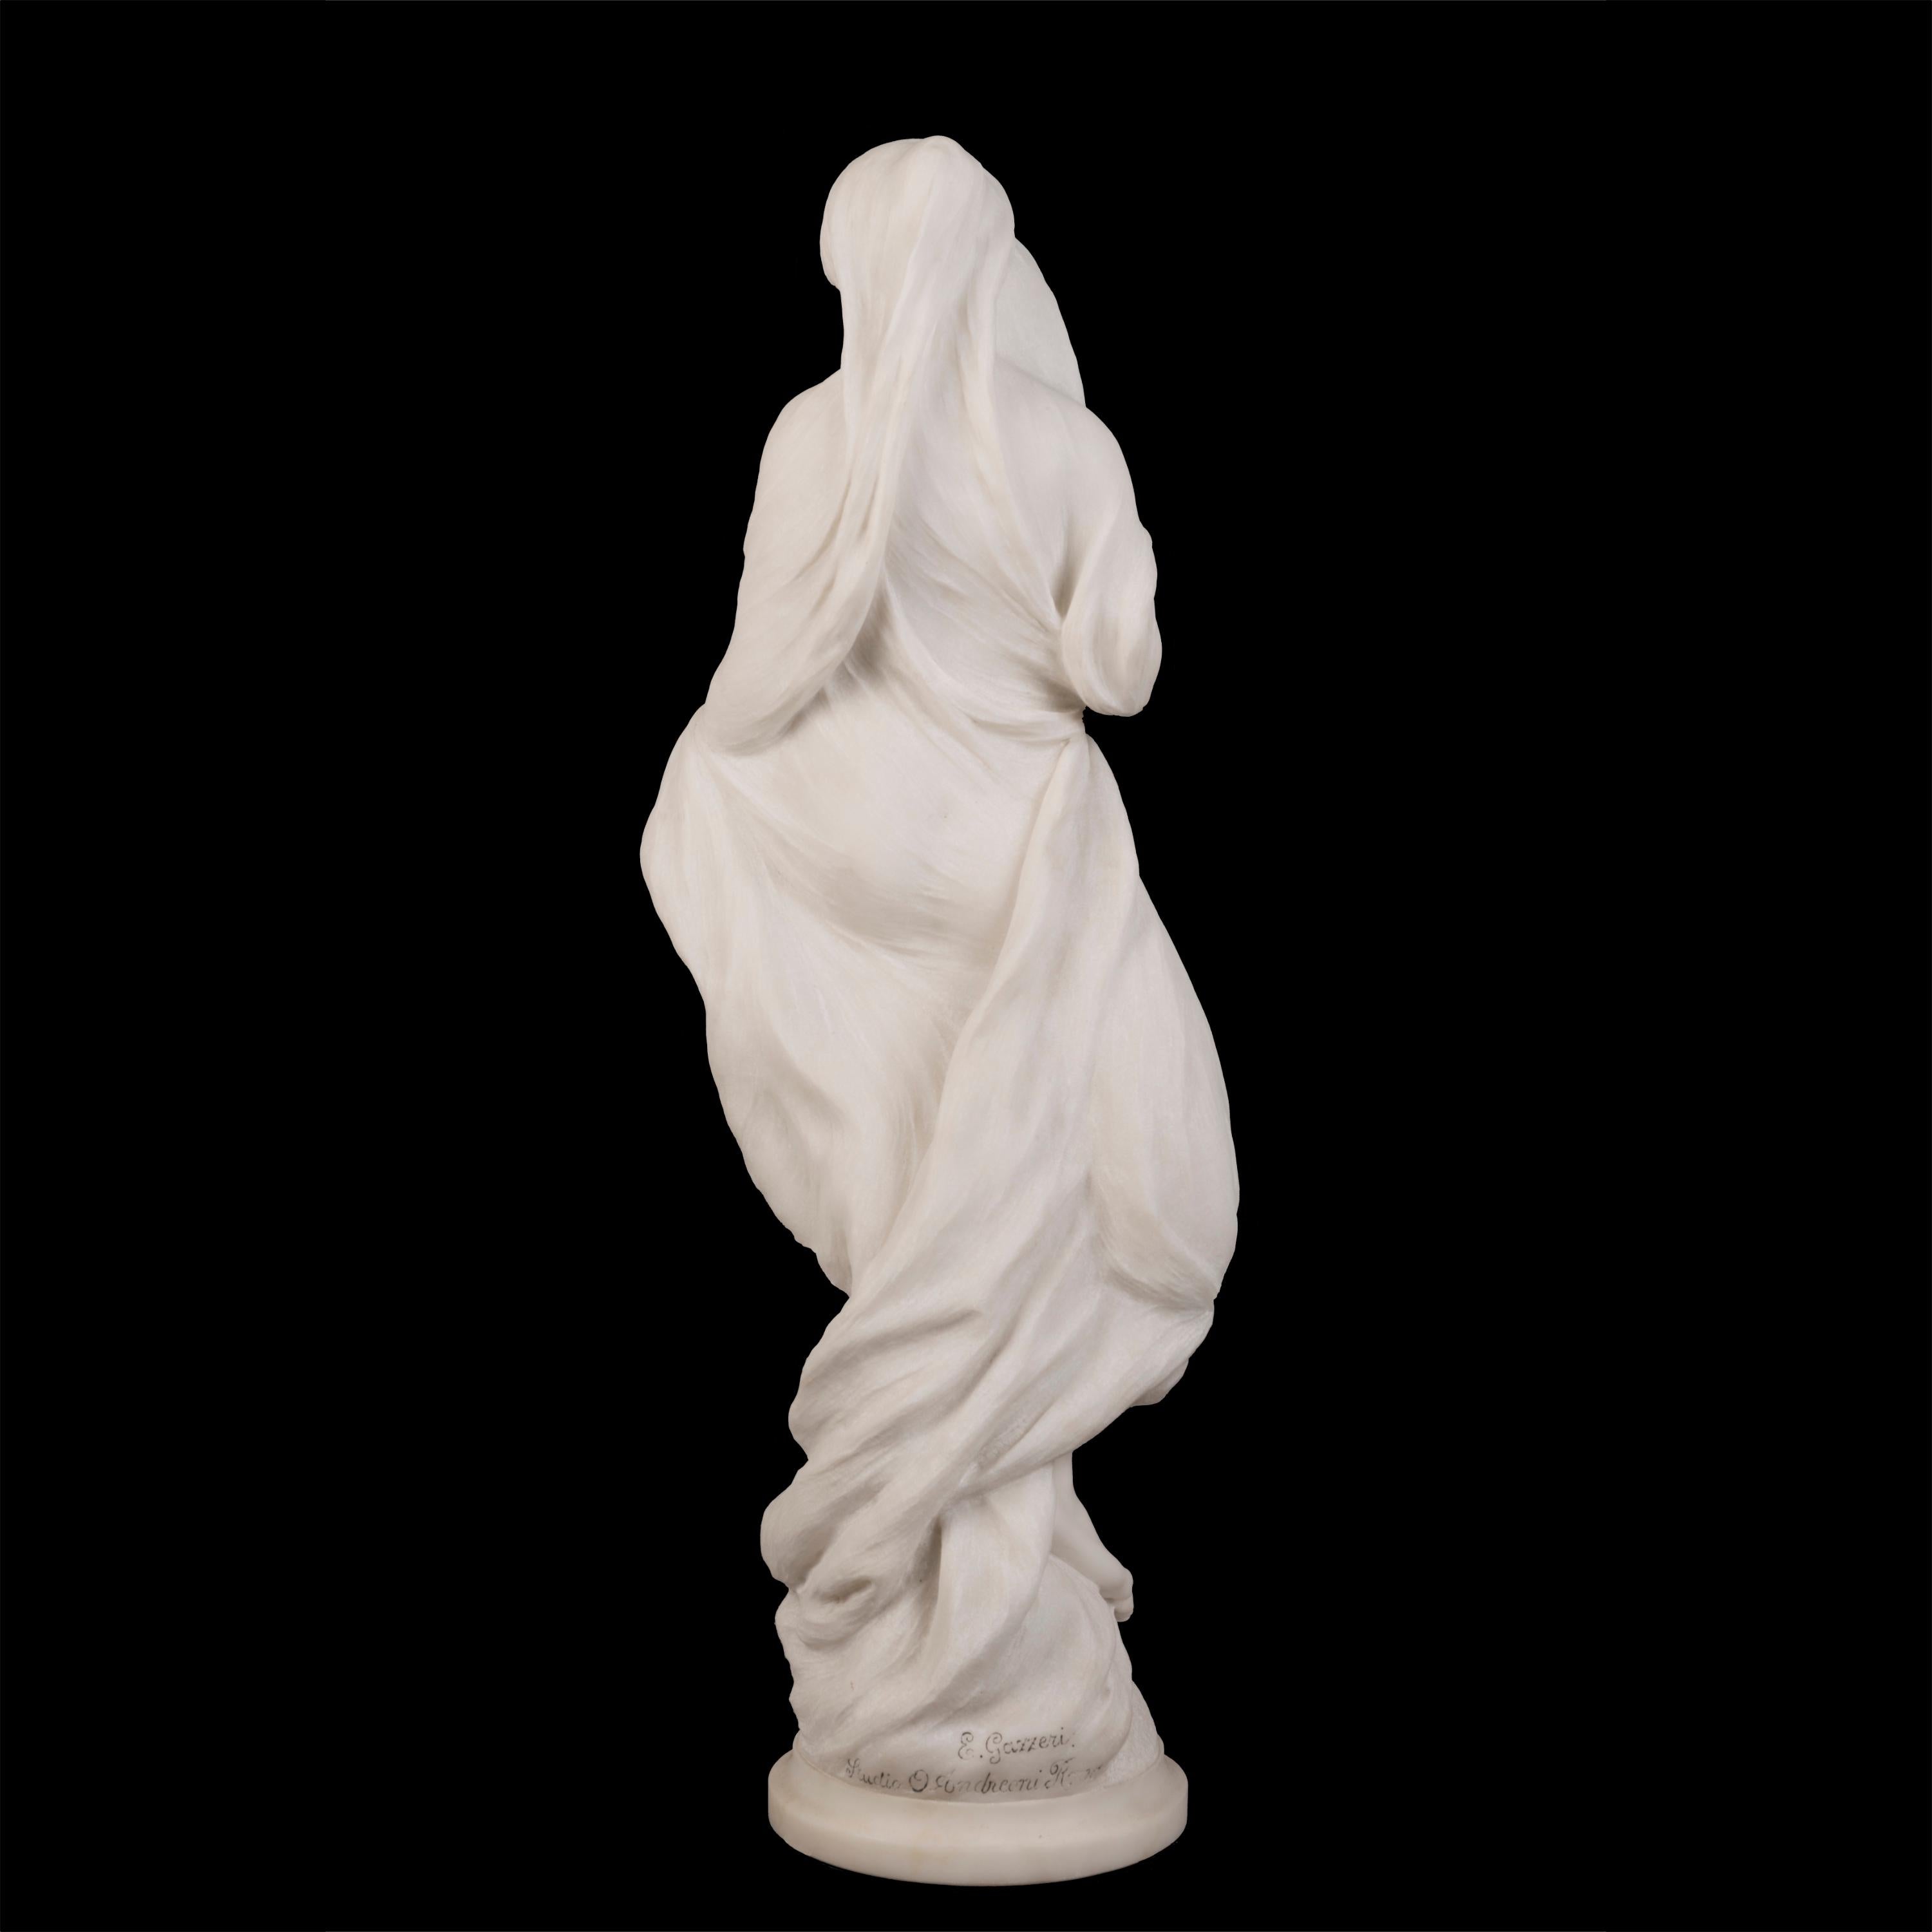 Hand-Carved 19th Century Italian Marble Sculpture of the Goddess Flora by Ernesto Gazzeri For Sale